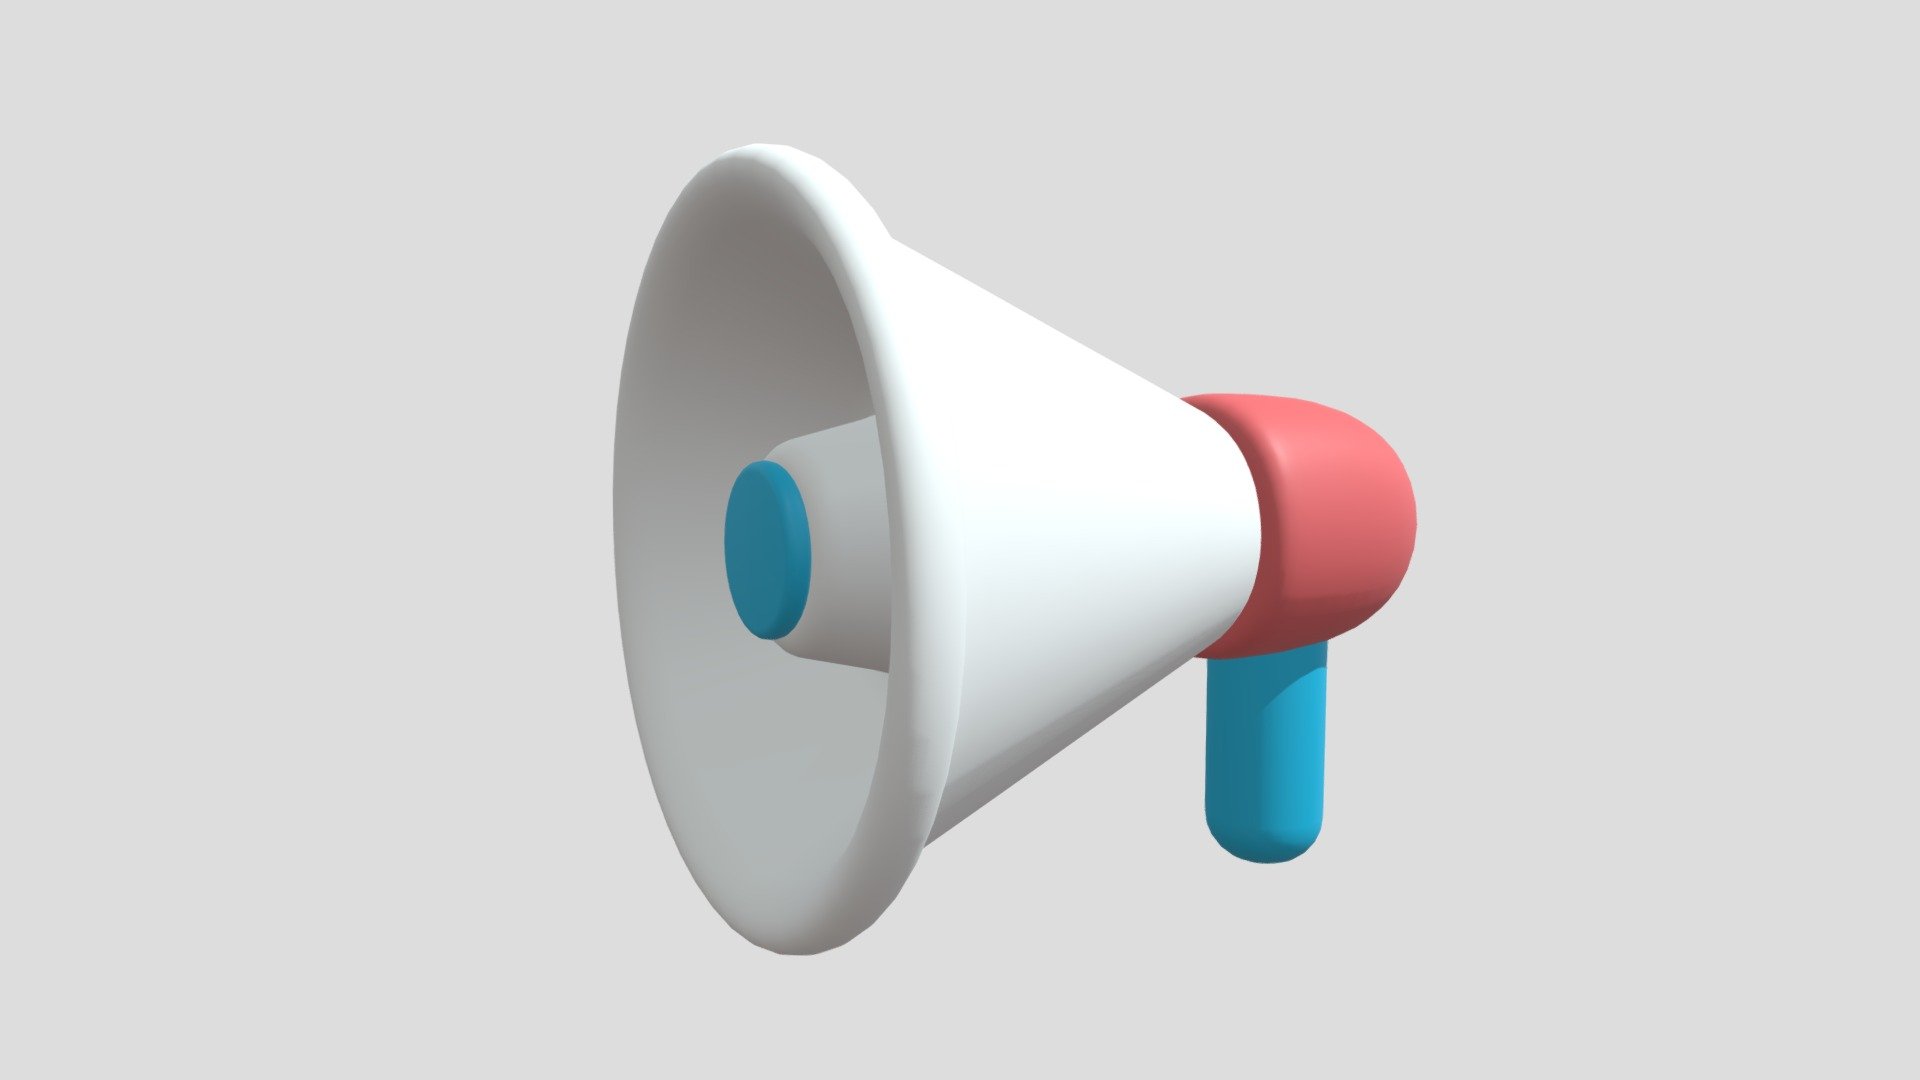 -Cartoon Lovely Megaphone 1.

-This product contains 4 objects.

-Total vert: 3,778 poly: 3,670.

-This product was created in Blender 3.0.

-Formats: blend, fbx, obj, c4d, dae, abc, stl, glb, unity.

-We hope you enjoy this model.

-Thank you 3d model